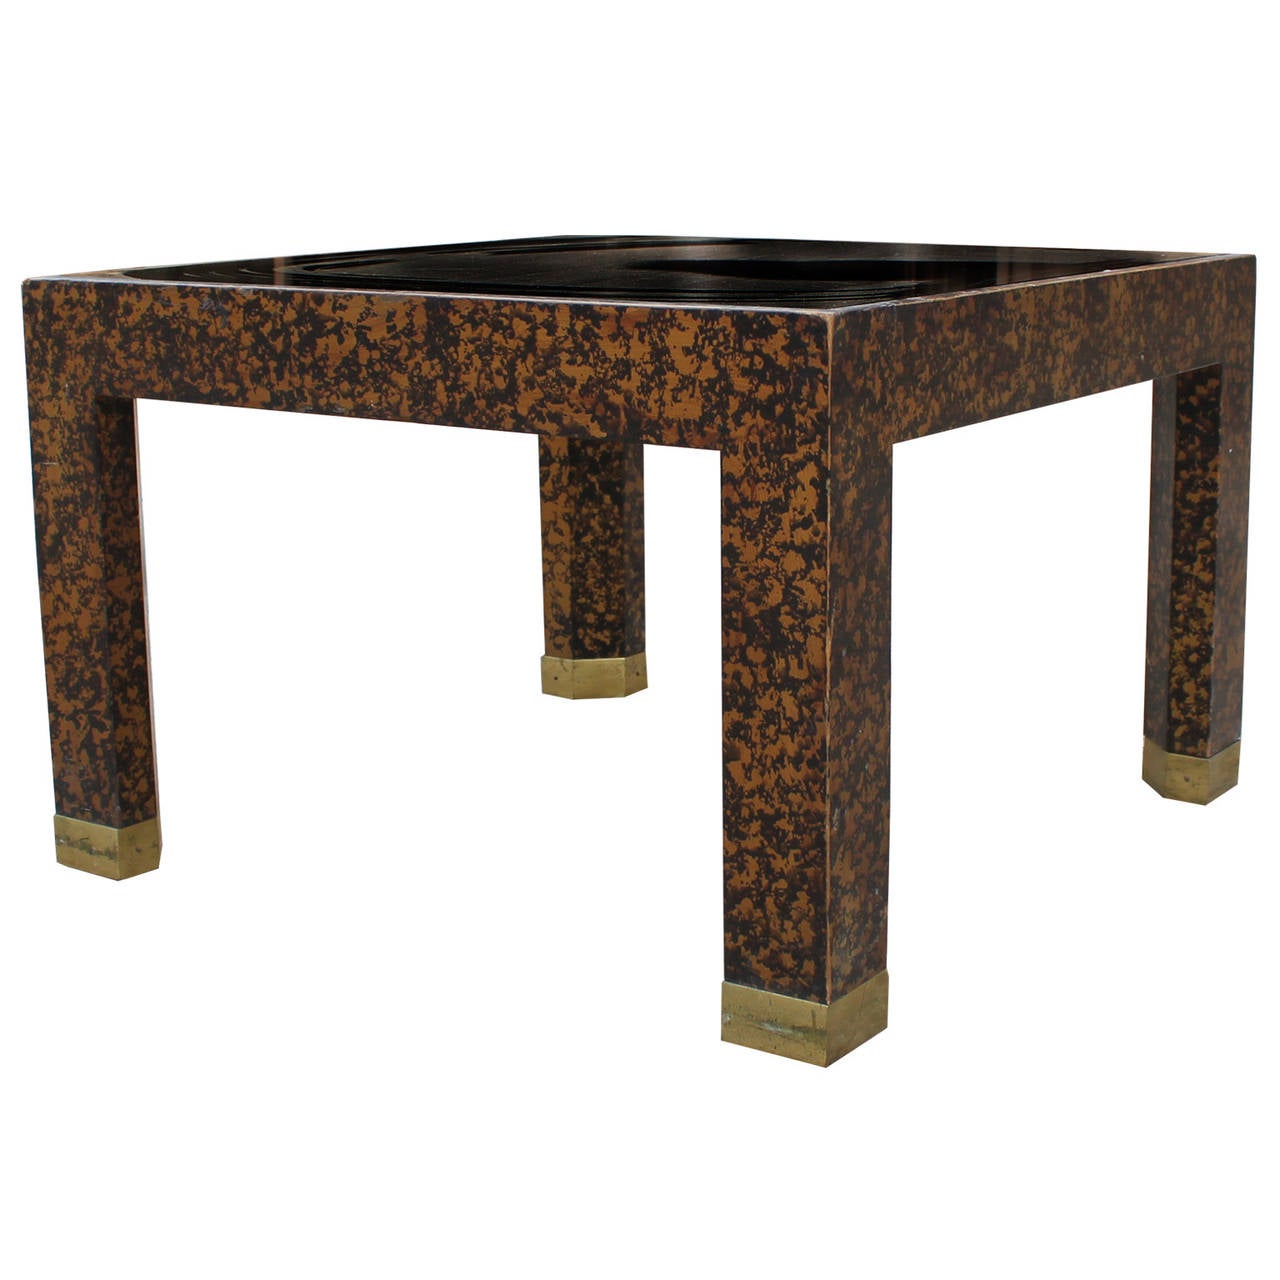 American Faux Tortoise Shell Henredon Tables with Brass Feet